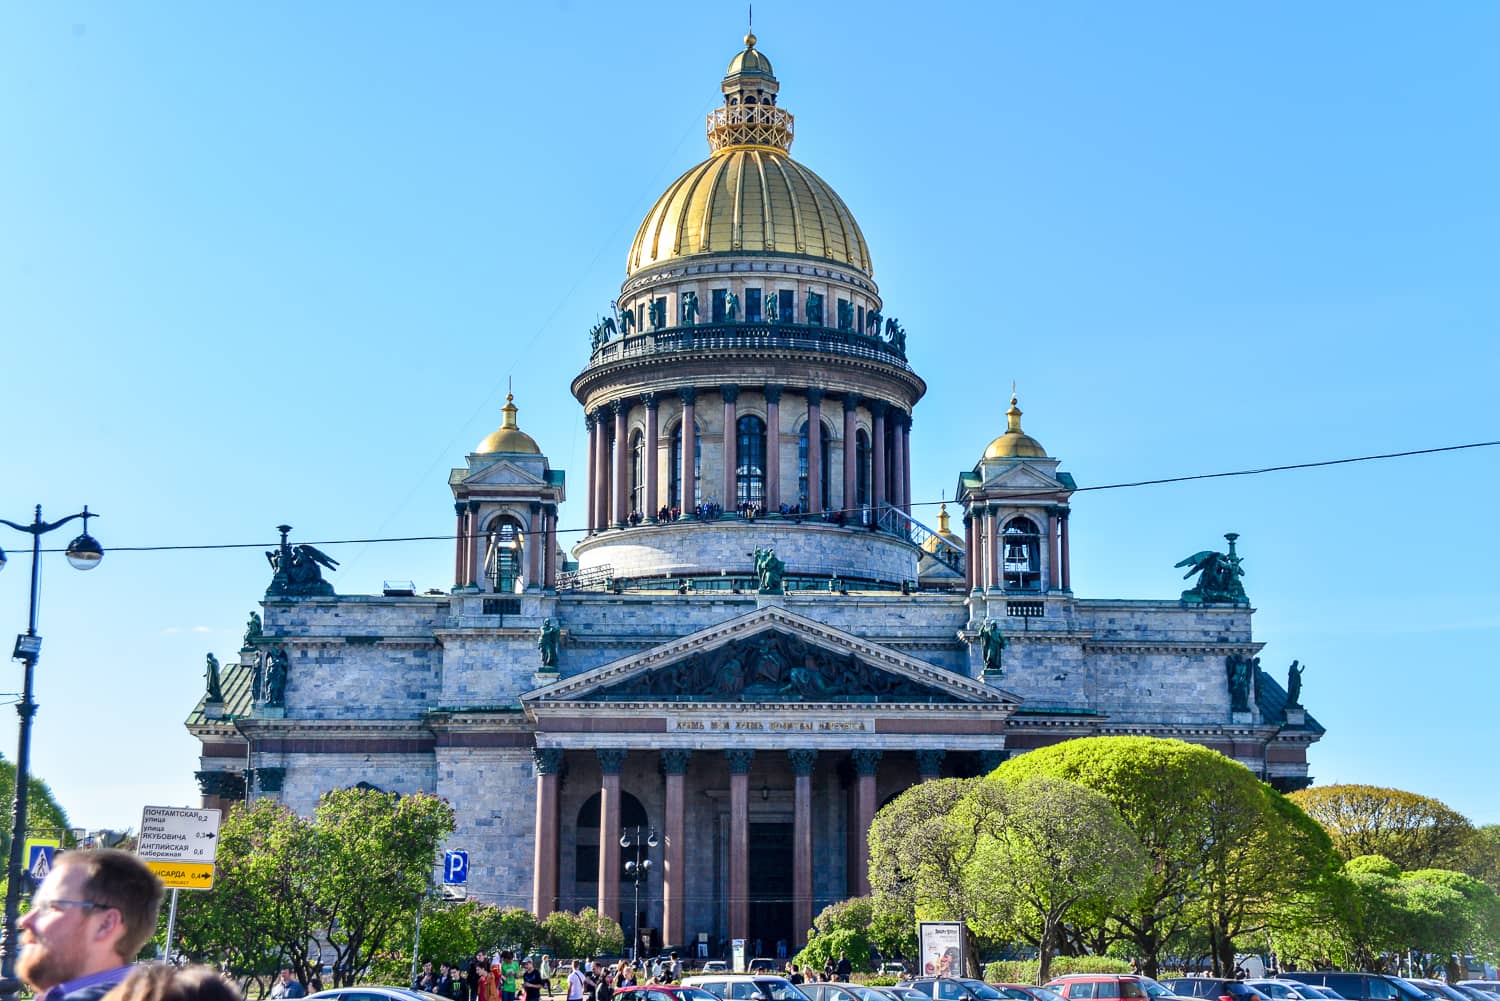 Another golden dome on Saint Isaac's Cathedral